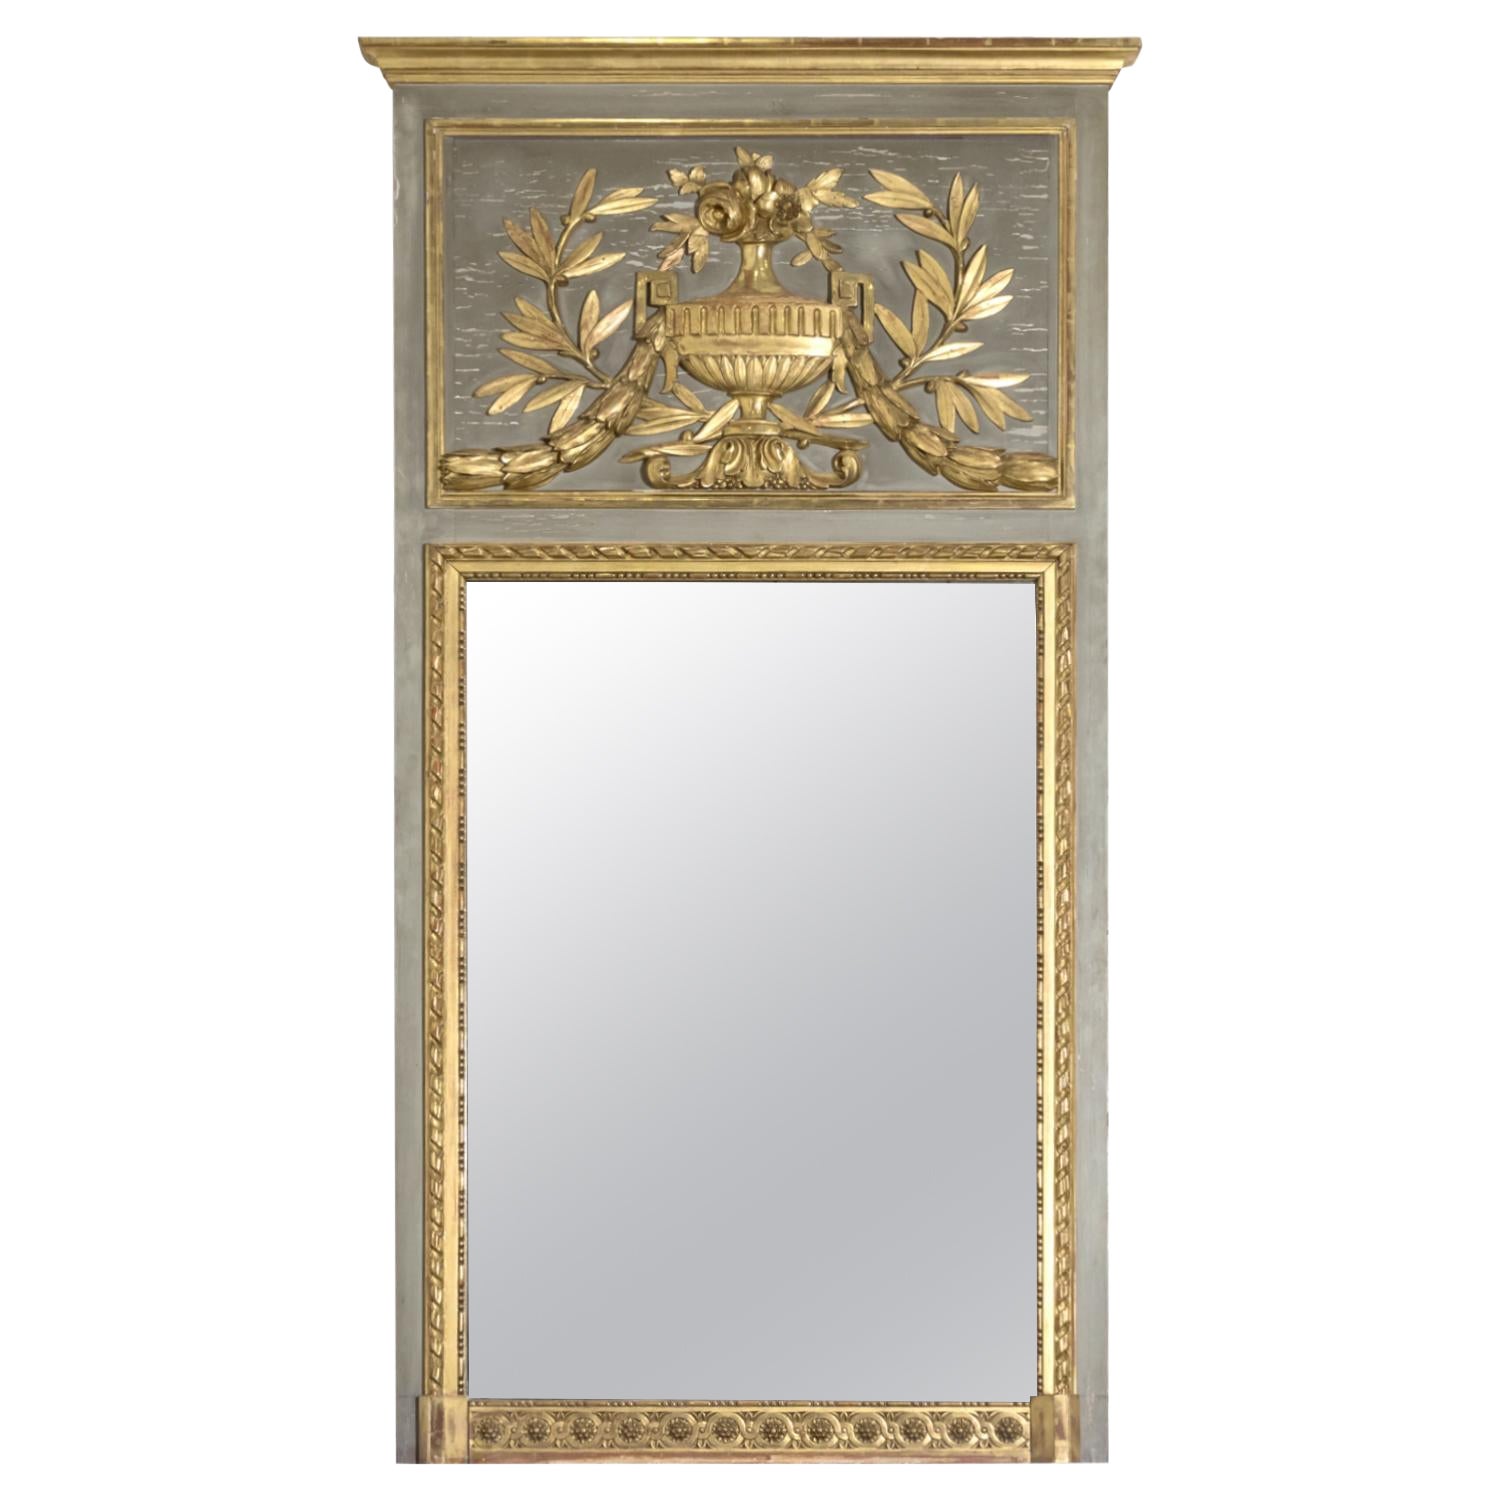 19th Century French Louis XVI Style Painted and Parcel Gilt Trumeau Mirror